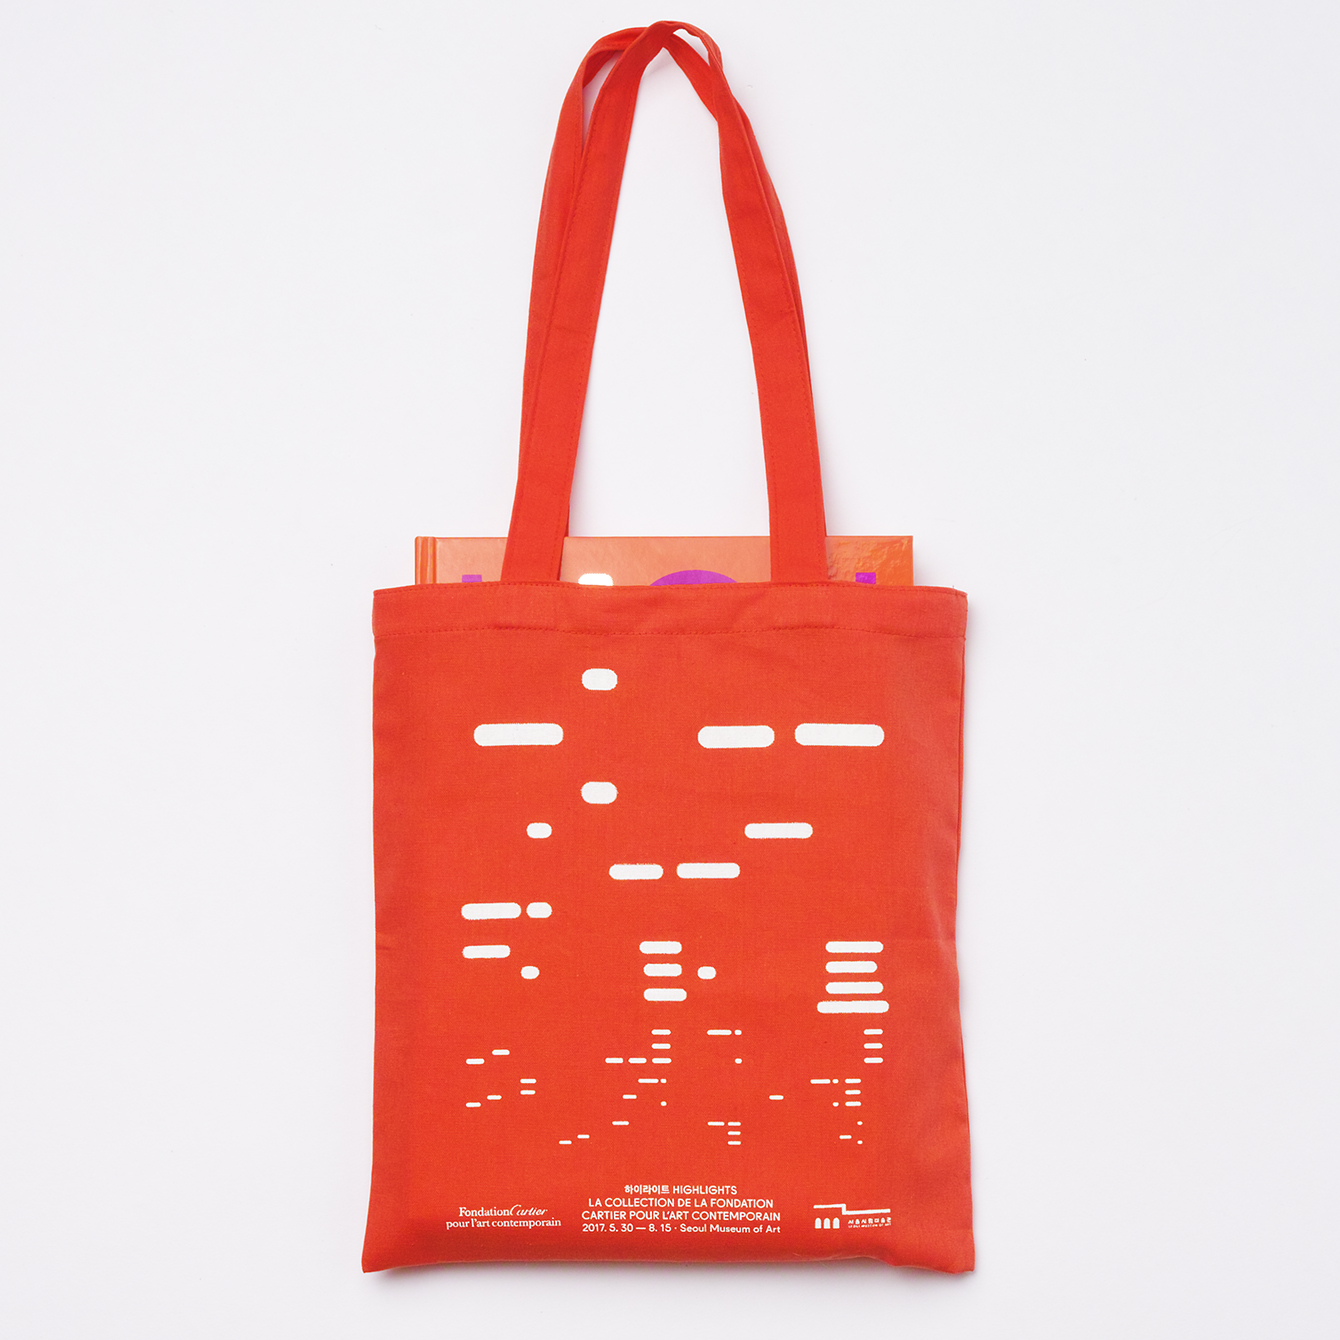 Visual identity and tote bag by Studio fnt for South Korean art exhibition Highlights at SeMA